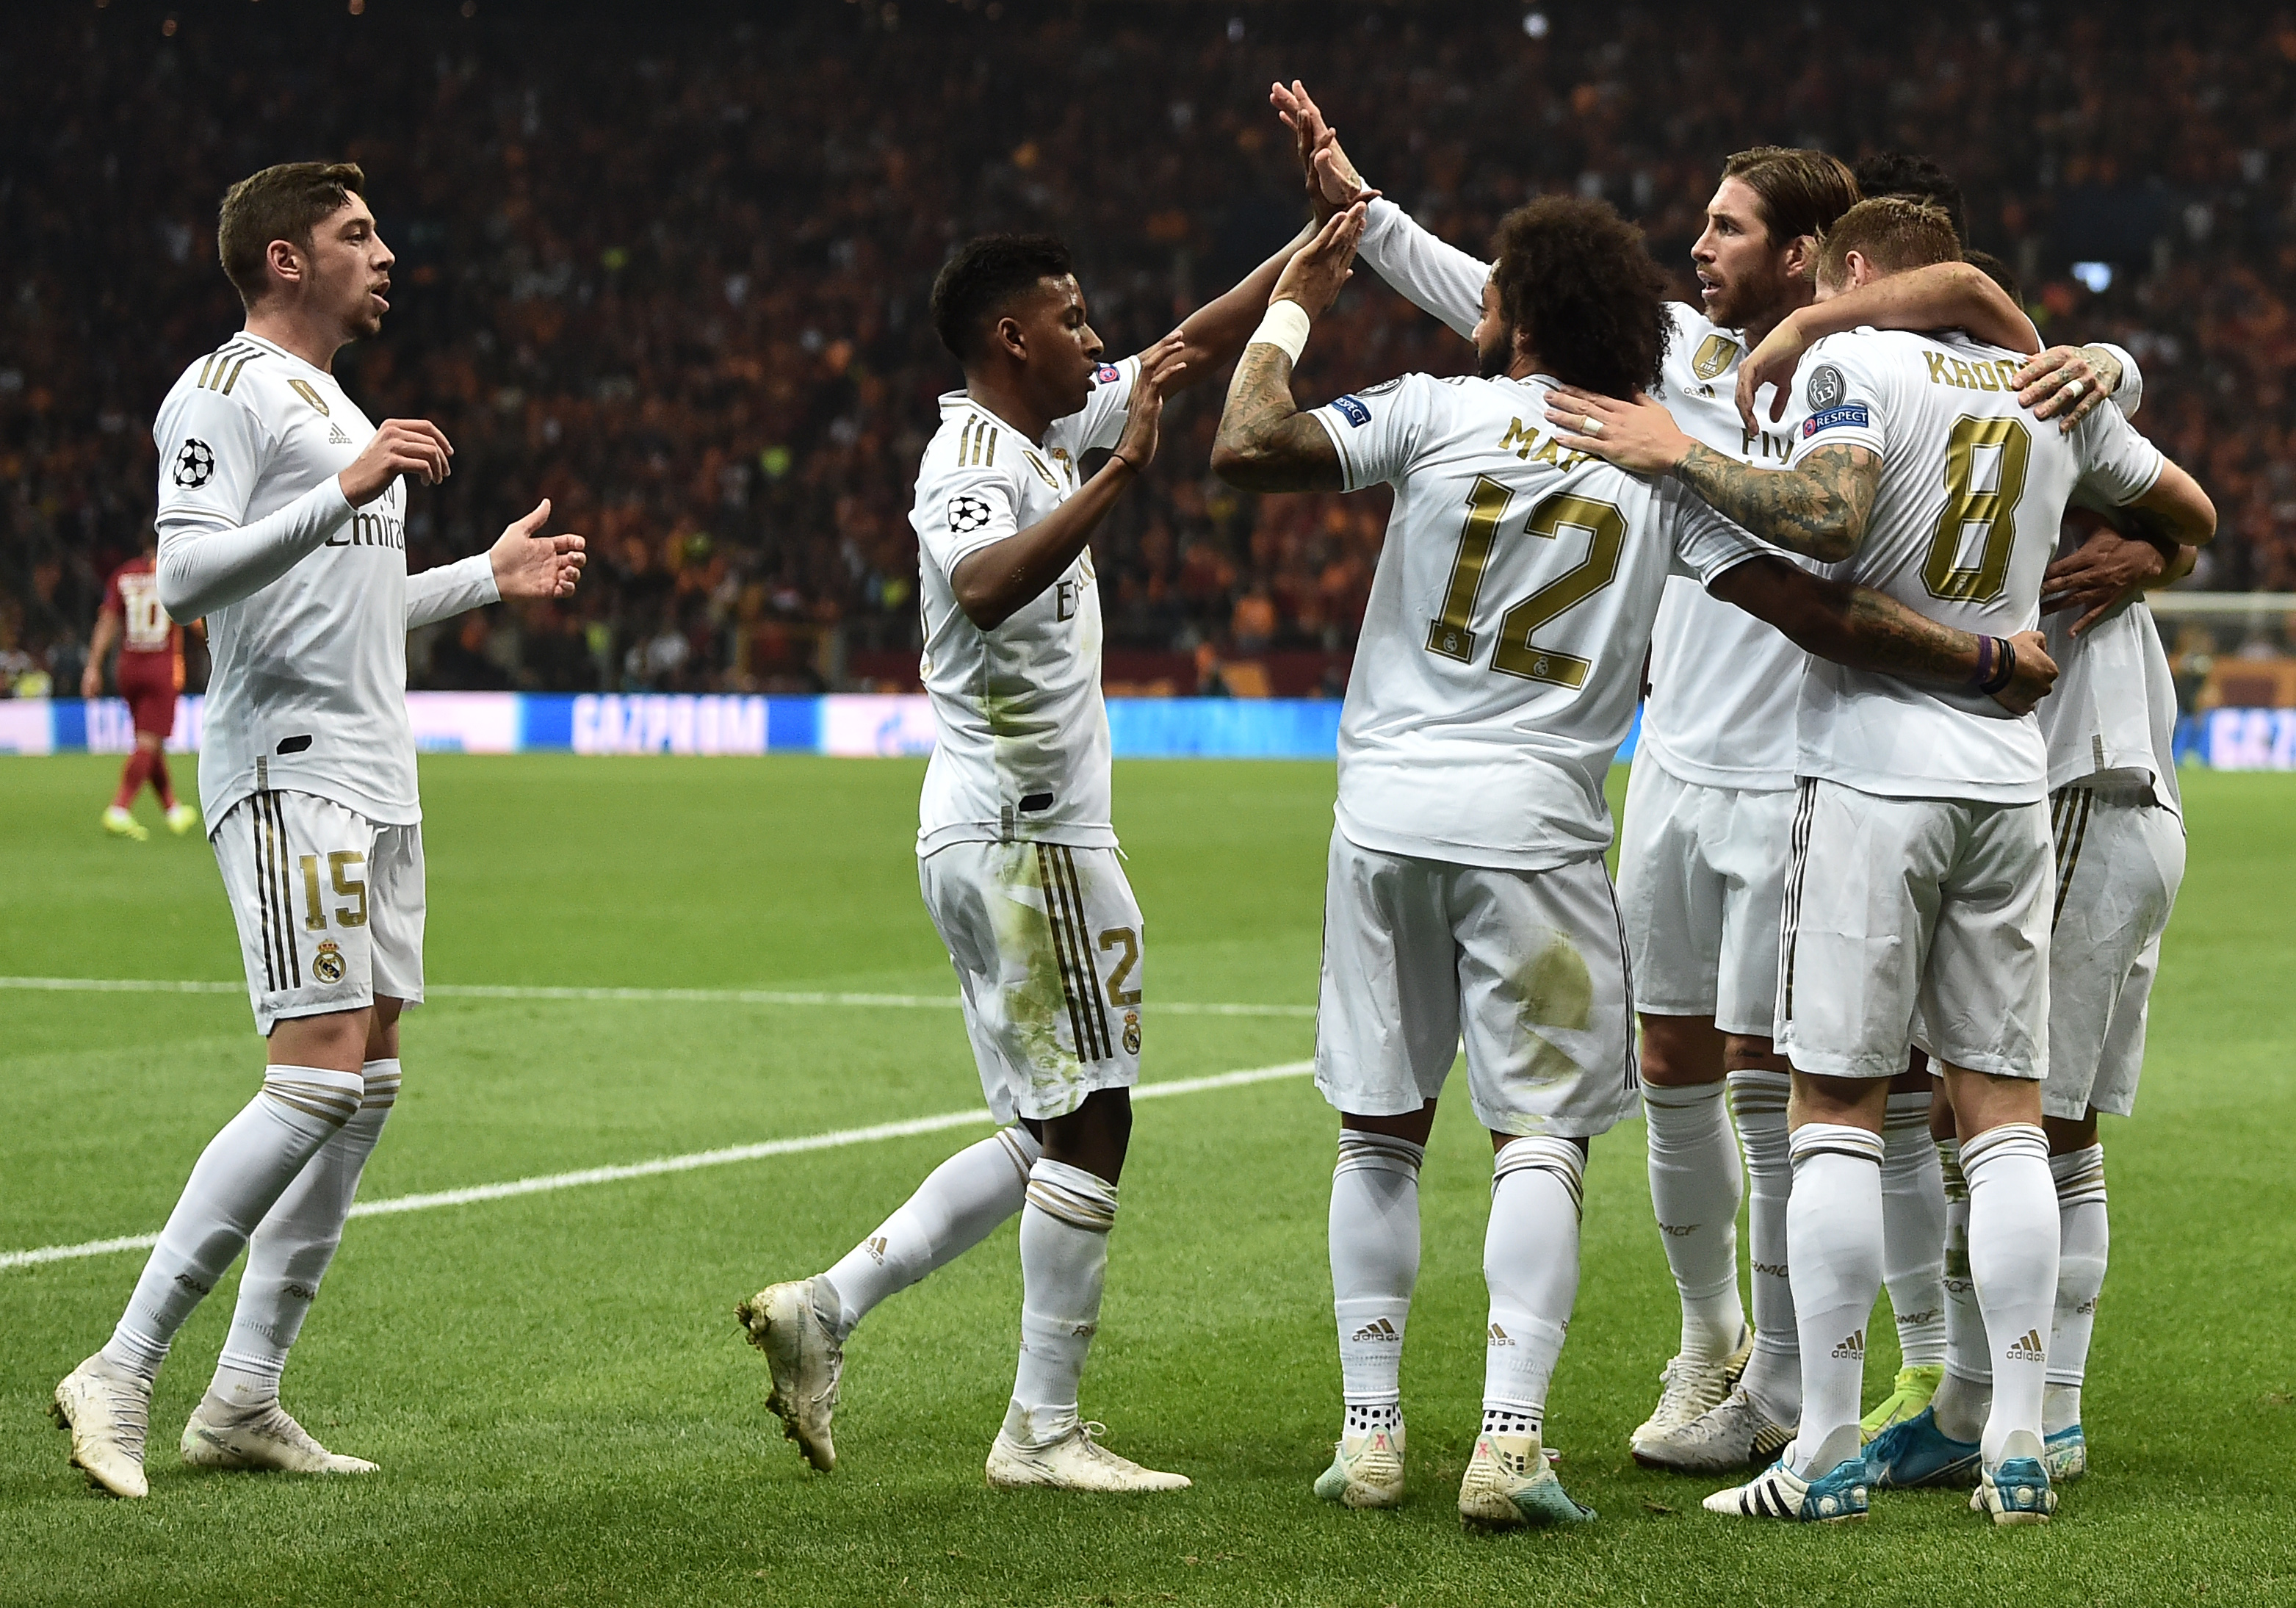 Real Madrid's German midfielder Toni Kroos (R) celebrates with team mates after he scored a goal during the UEFA Champions League group A football match between Galatasaray and Real Madrid on October 22, 2019 at the Ali Sami Yen Spor Kompleksi in Istanbul. (Photo by OZAN KOSE / AFP) (Photo by OZAN KOSE/AFP via Getty Images)